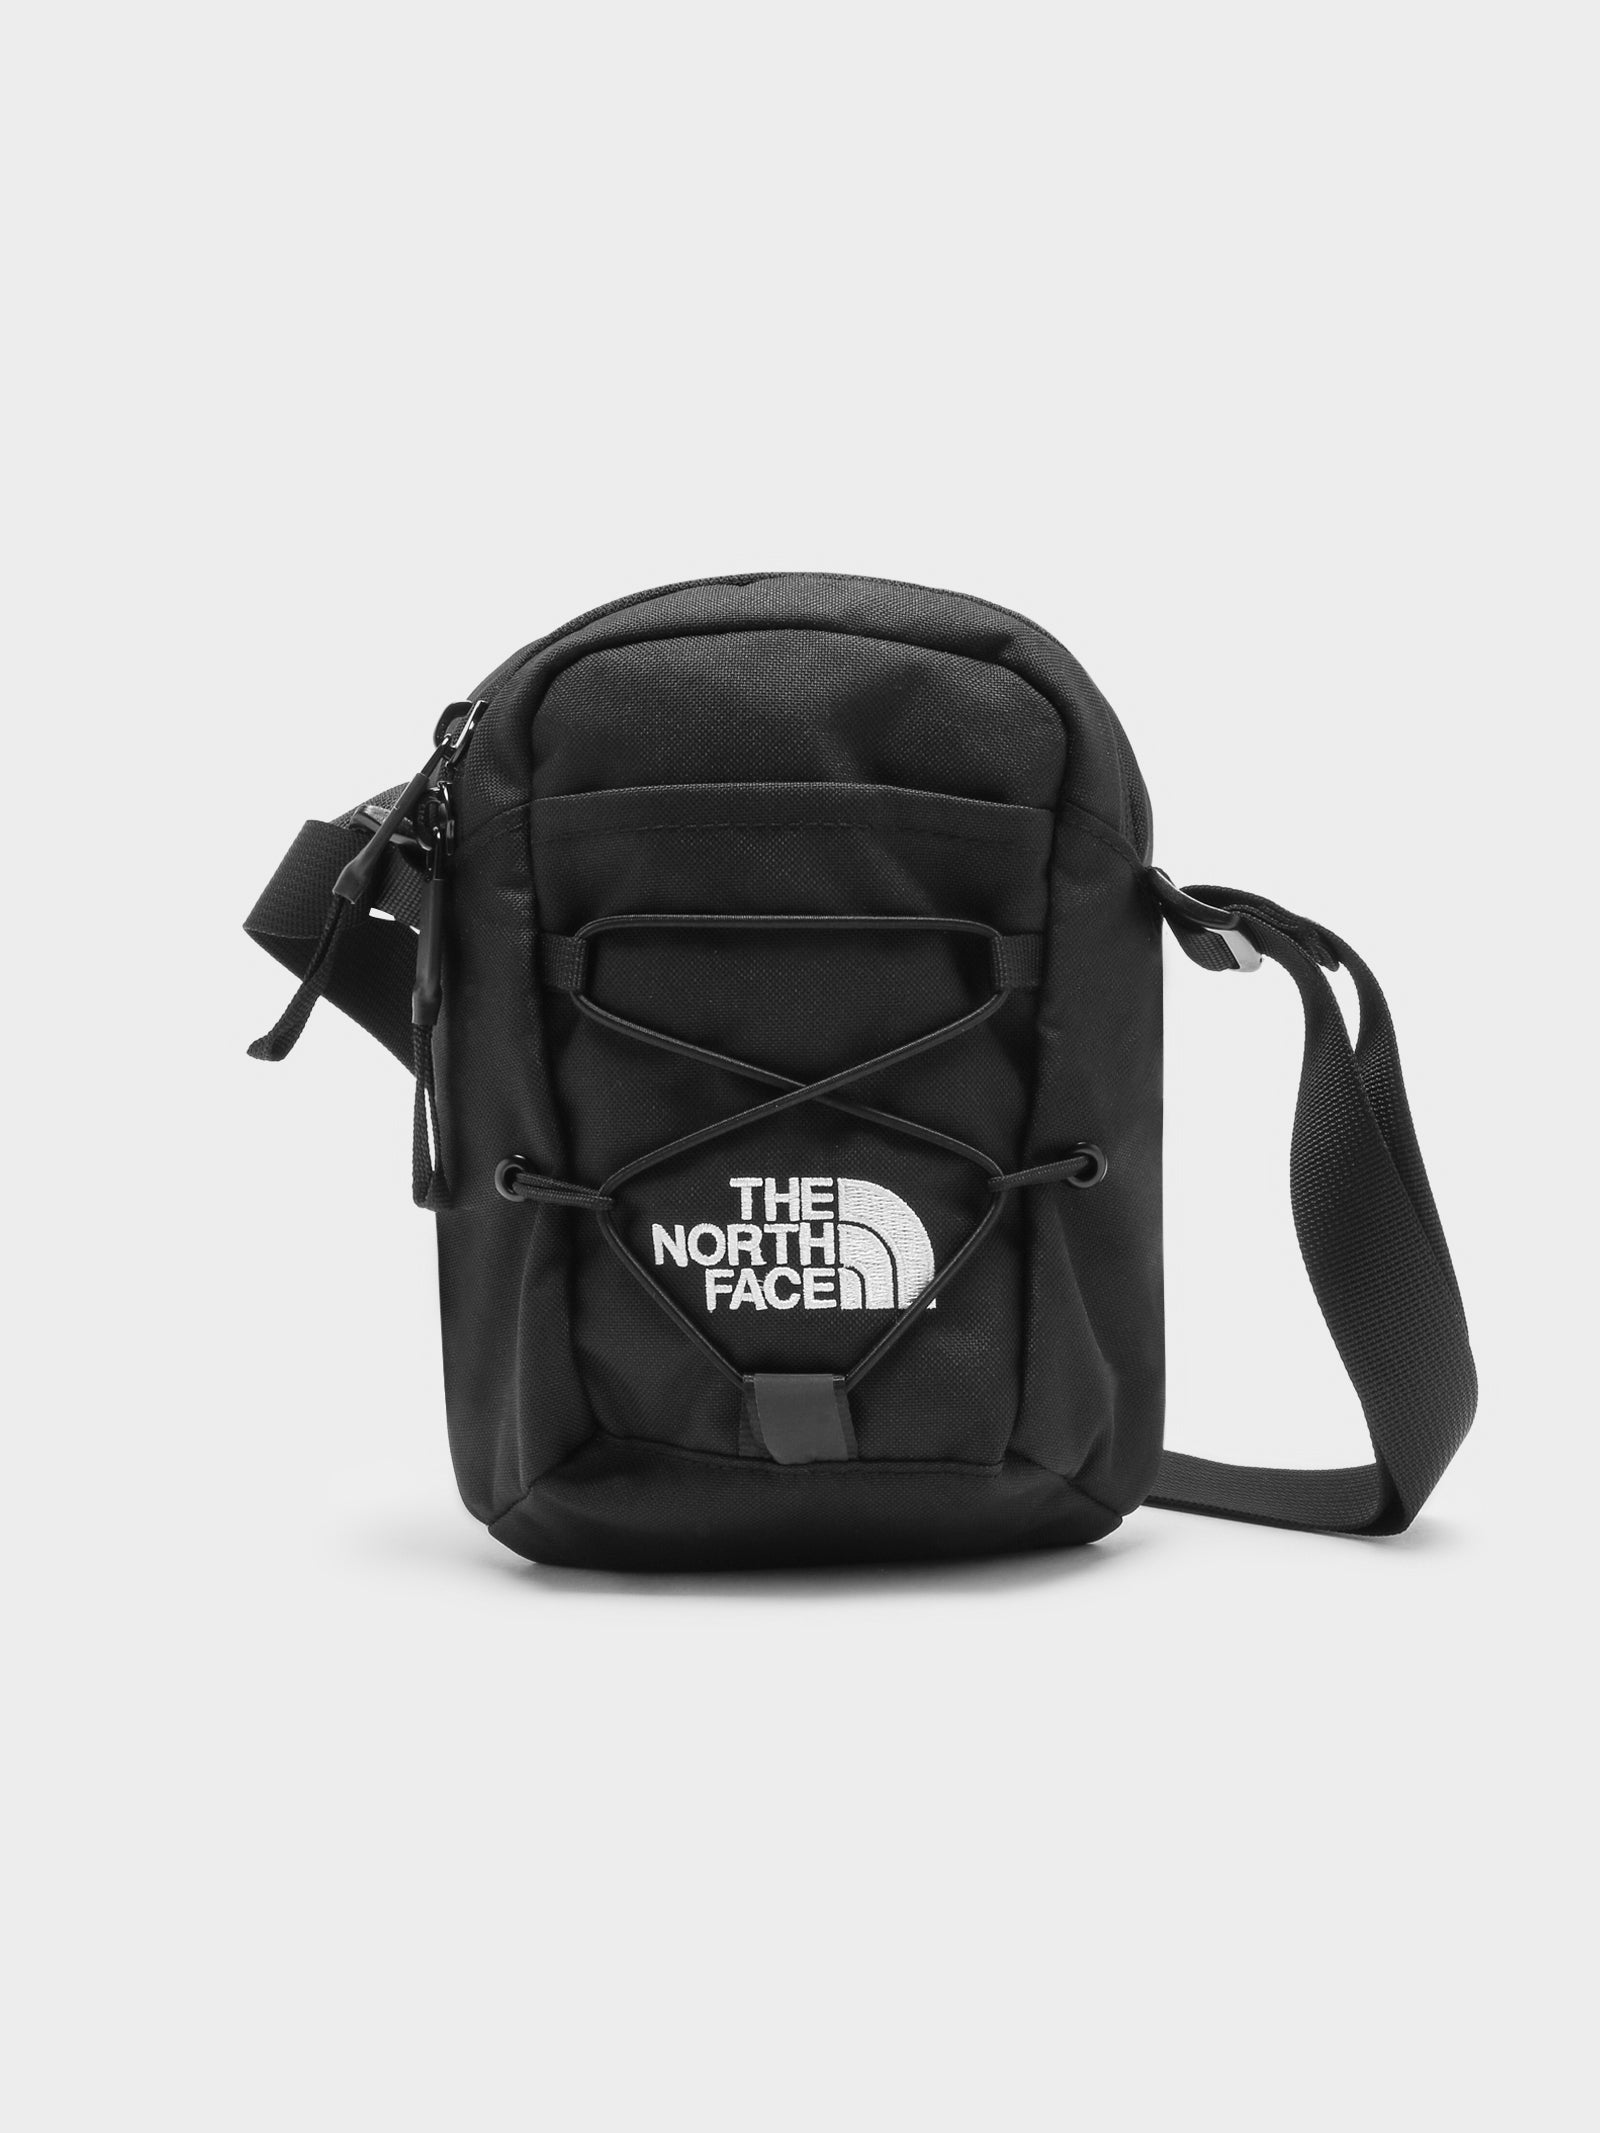 The North Face Unisex Vault Backpack TNF Black : Amazon.in: Bags, Wallets  and Luggage